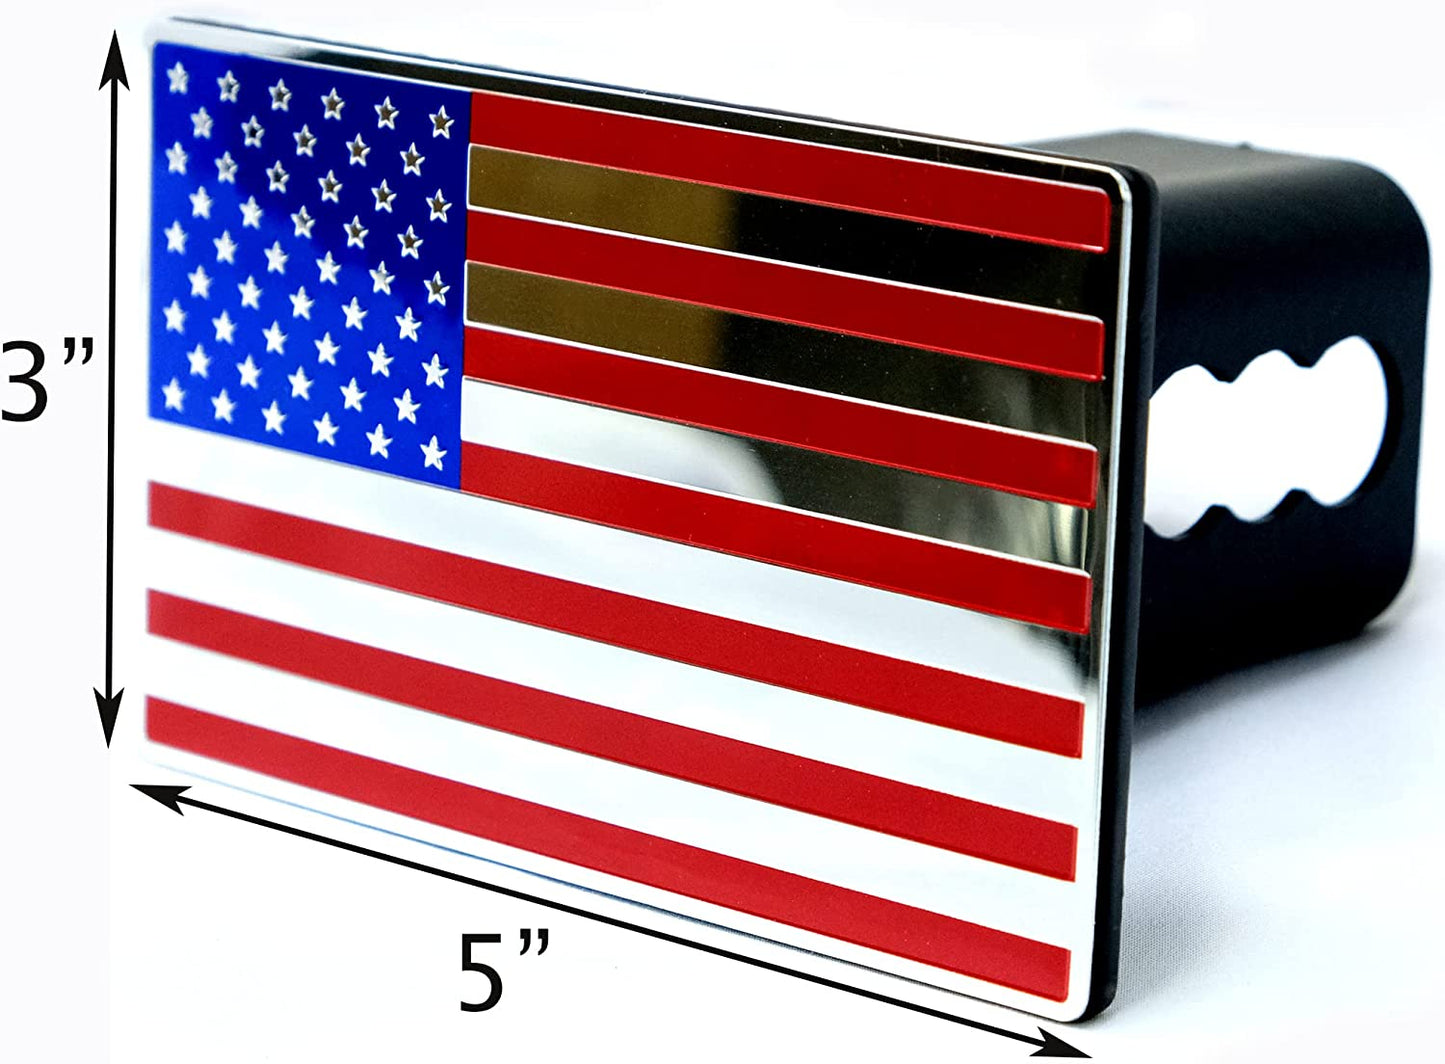 USA American Flag Metal Hitch Cover (Fits 1.25", 2", 2.5" 3" Receiver, Blue/Red/Chrome)